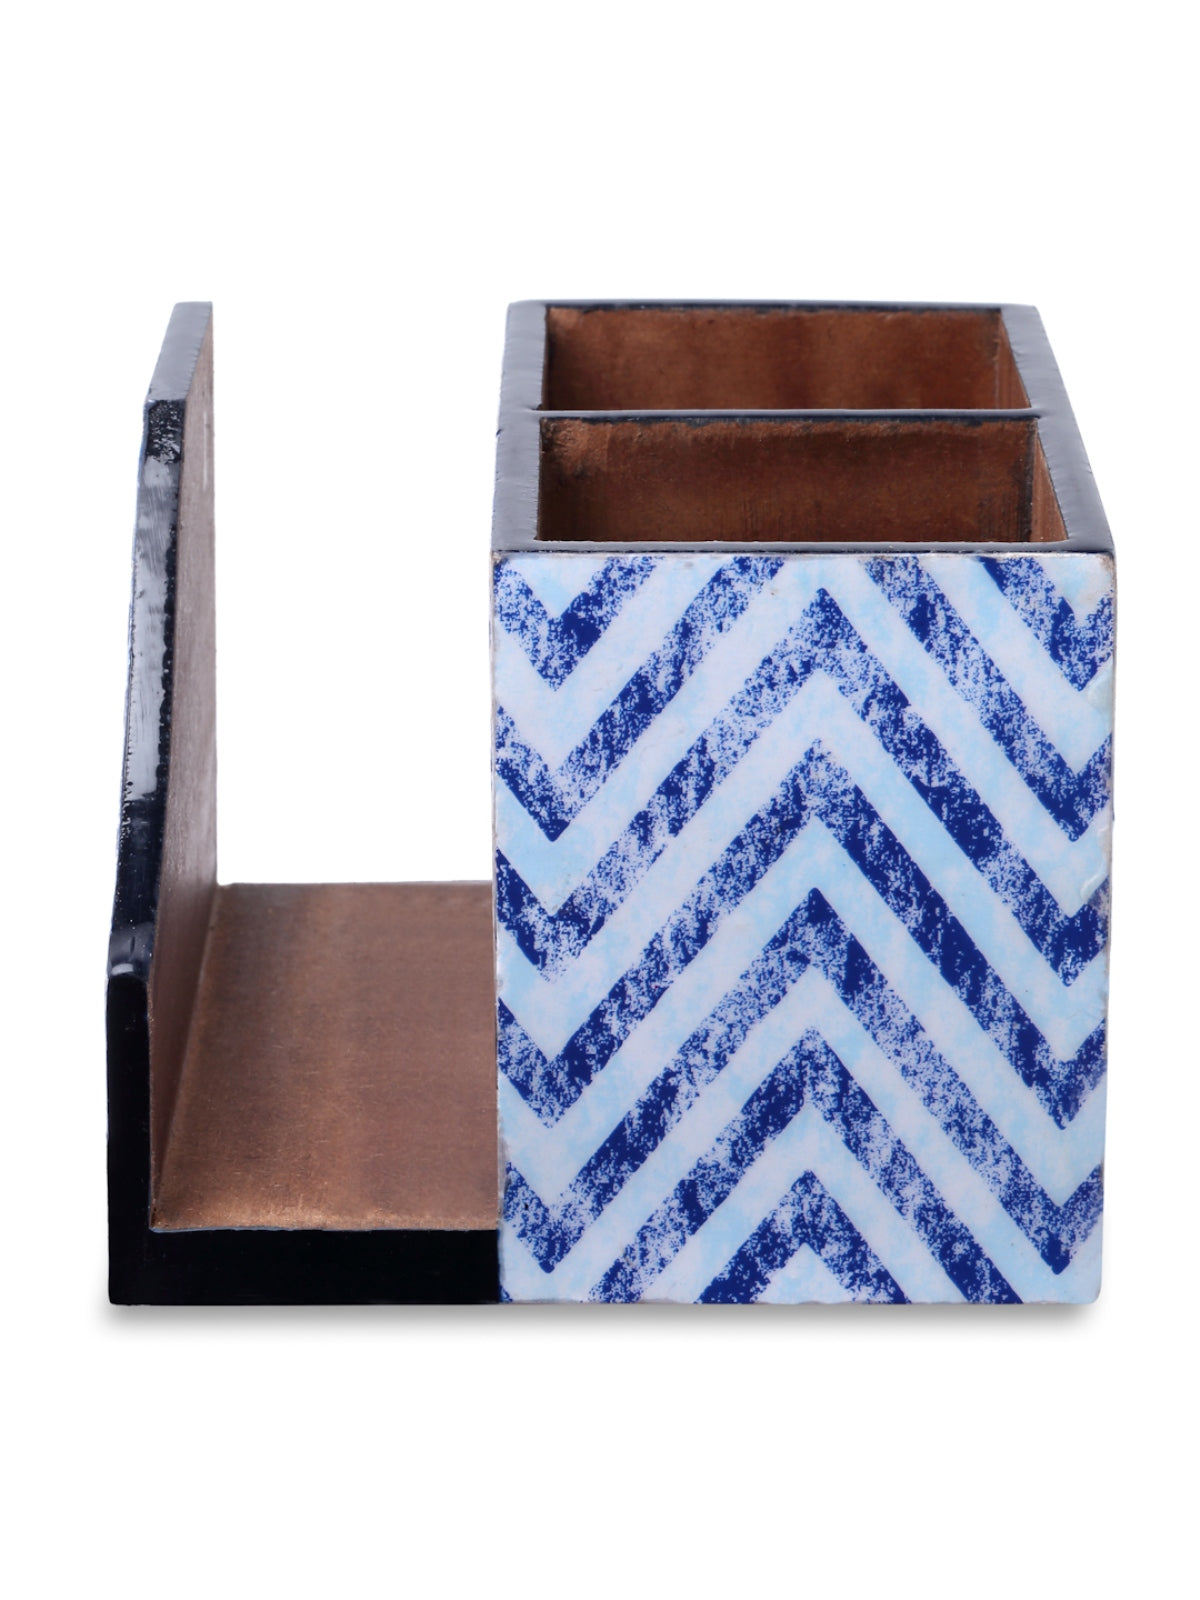 Blue & White Zig Zag Patterned MDF Tissue Holder & Cutlery Stand